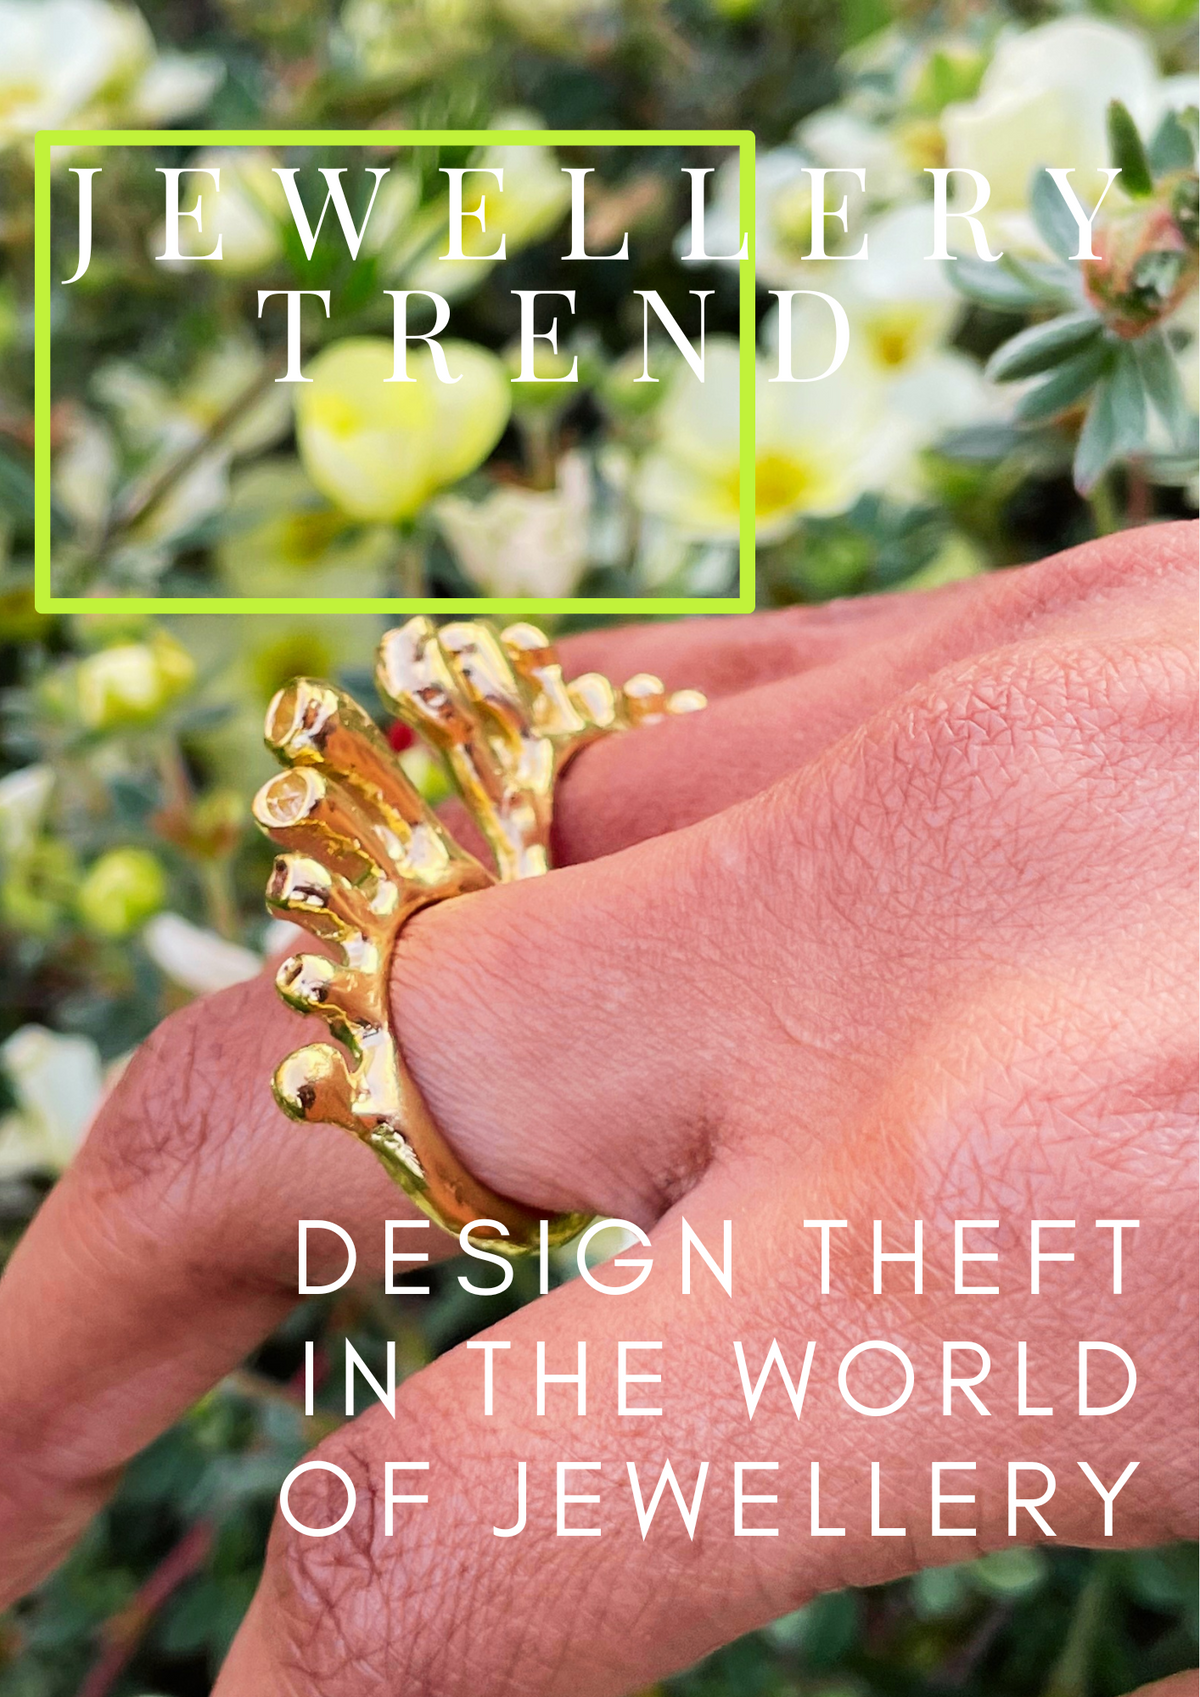 Copyright and Design Theft in the World of Jewellery